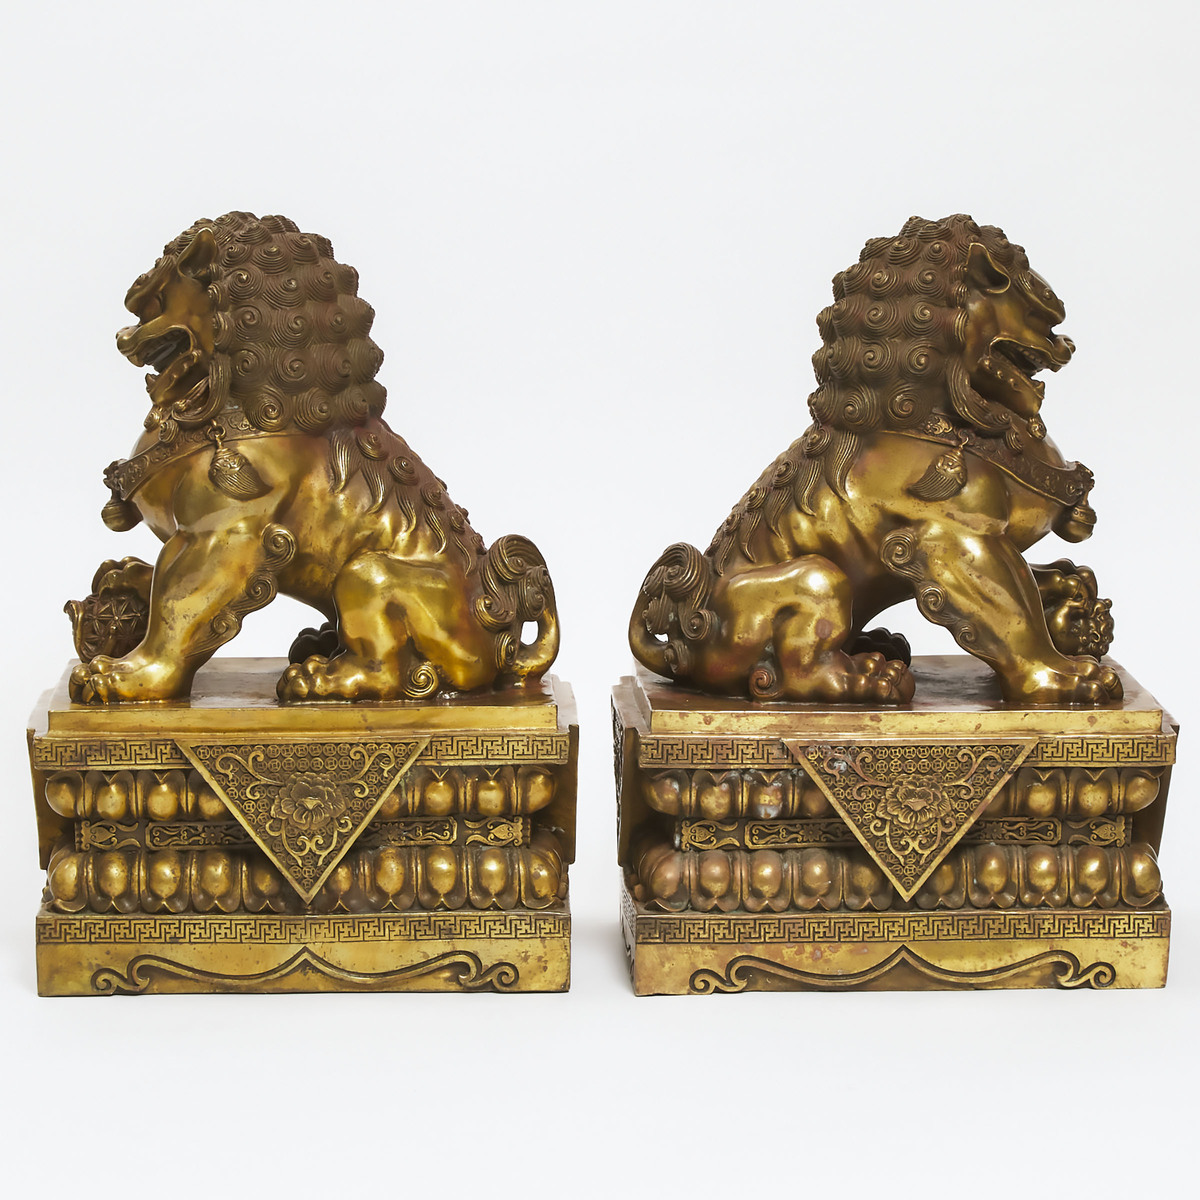 Pair of Buddhist Gilt Bronze Foo Dogs, early 20th century, 17.5 x 12 x 8.25 in — 44.5 x 30.5 x 21 cm - Image 2 of 2